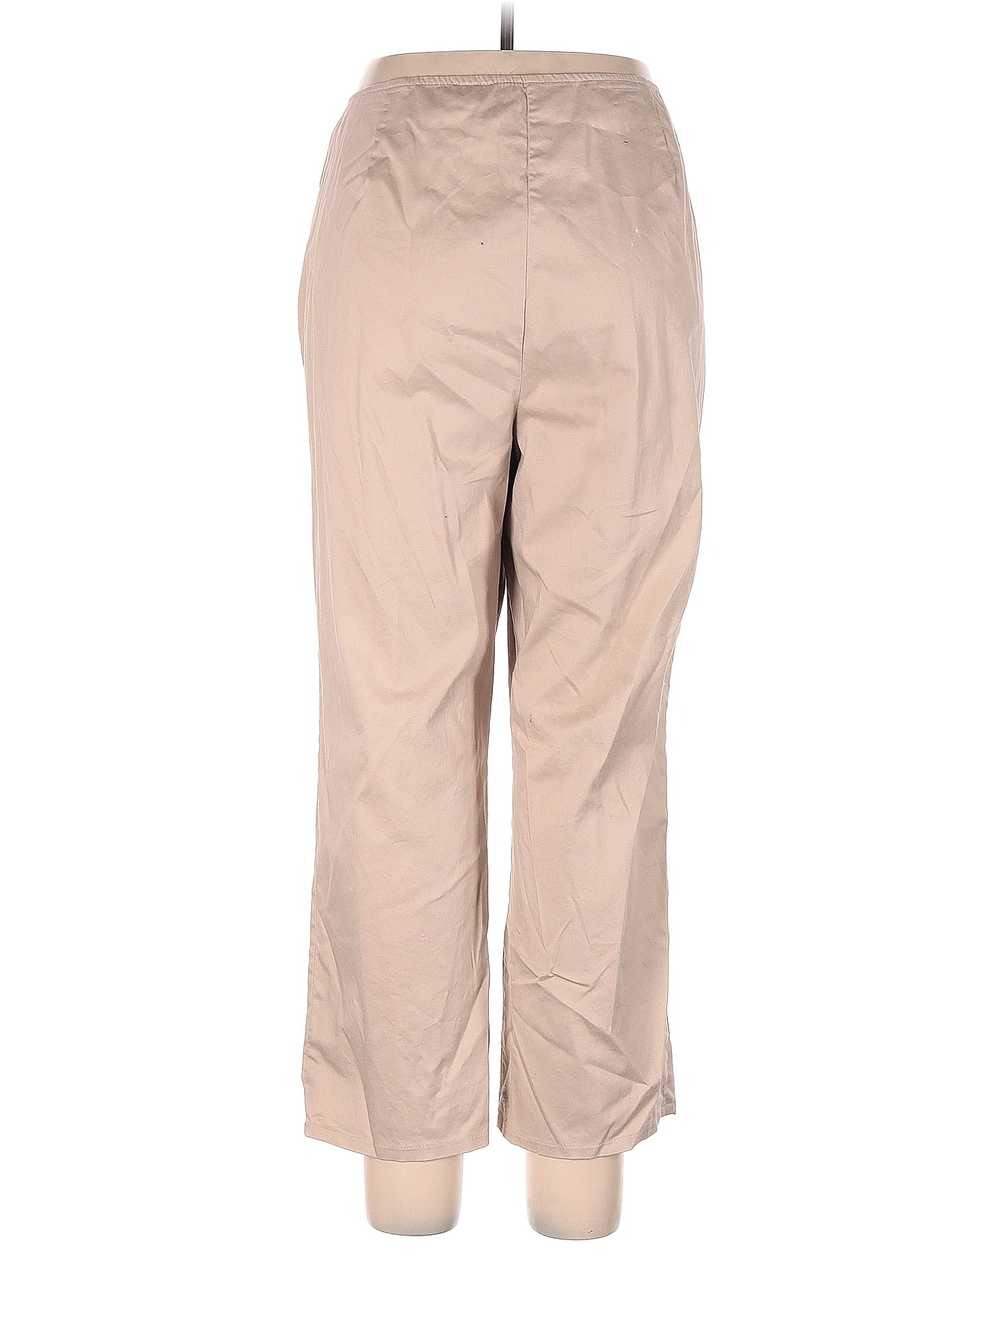 Jh Collectibles Women Brown Casual Pants 18 Plus - image 2